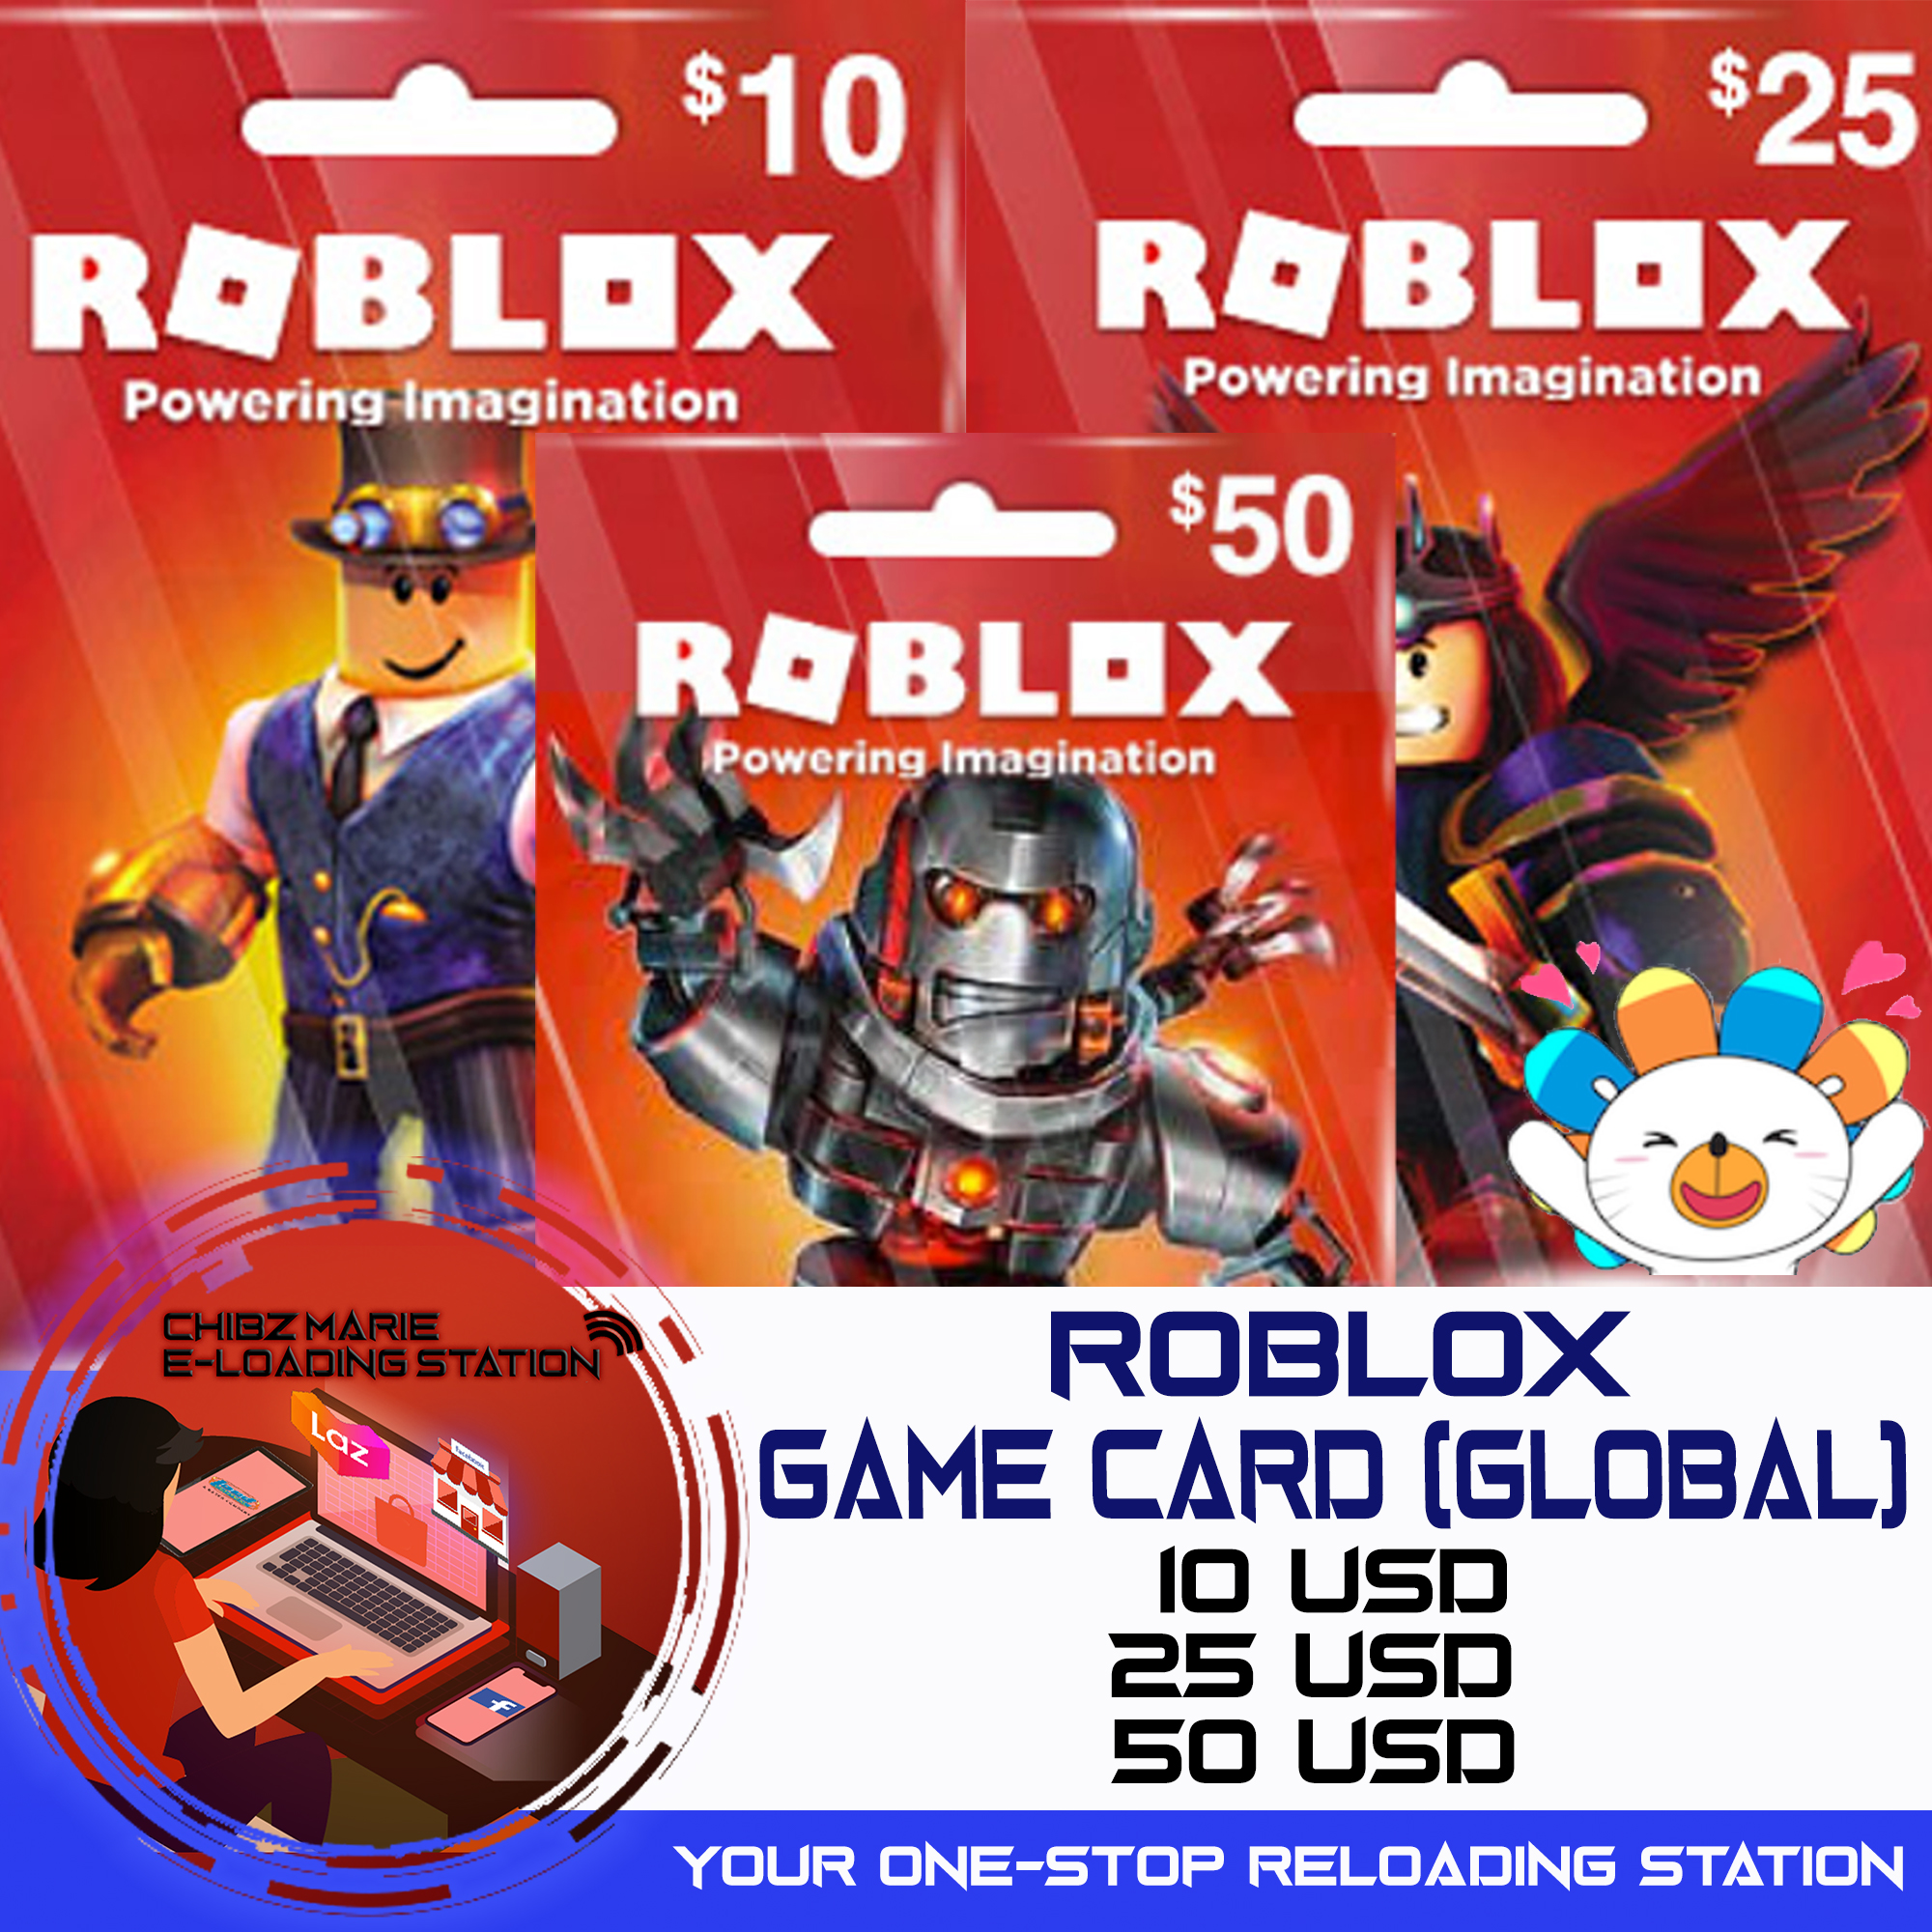 Robux Roblox Gift Card Game Card Global Us 10 25 50 Chibzmarie Lazada Ph - roblox robux game card